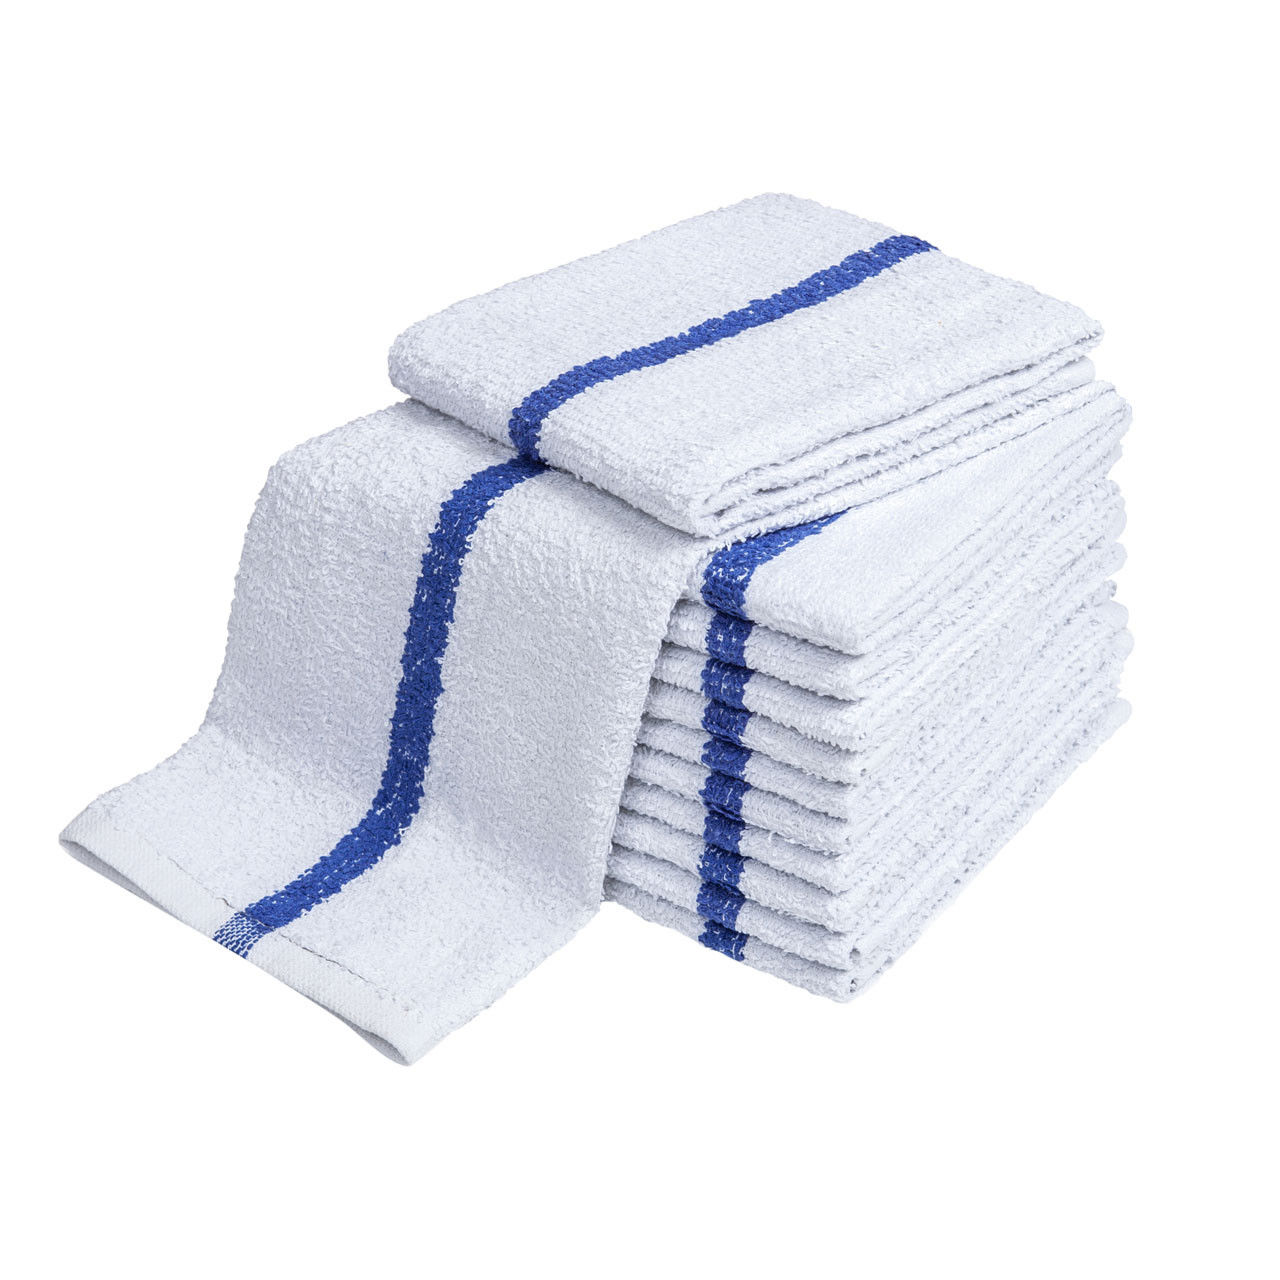 What specific design feature do ADI Bar Towels, Full Terry, Center Stripe have?